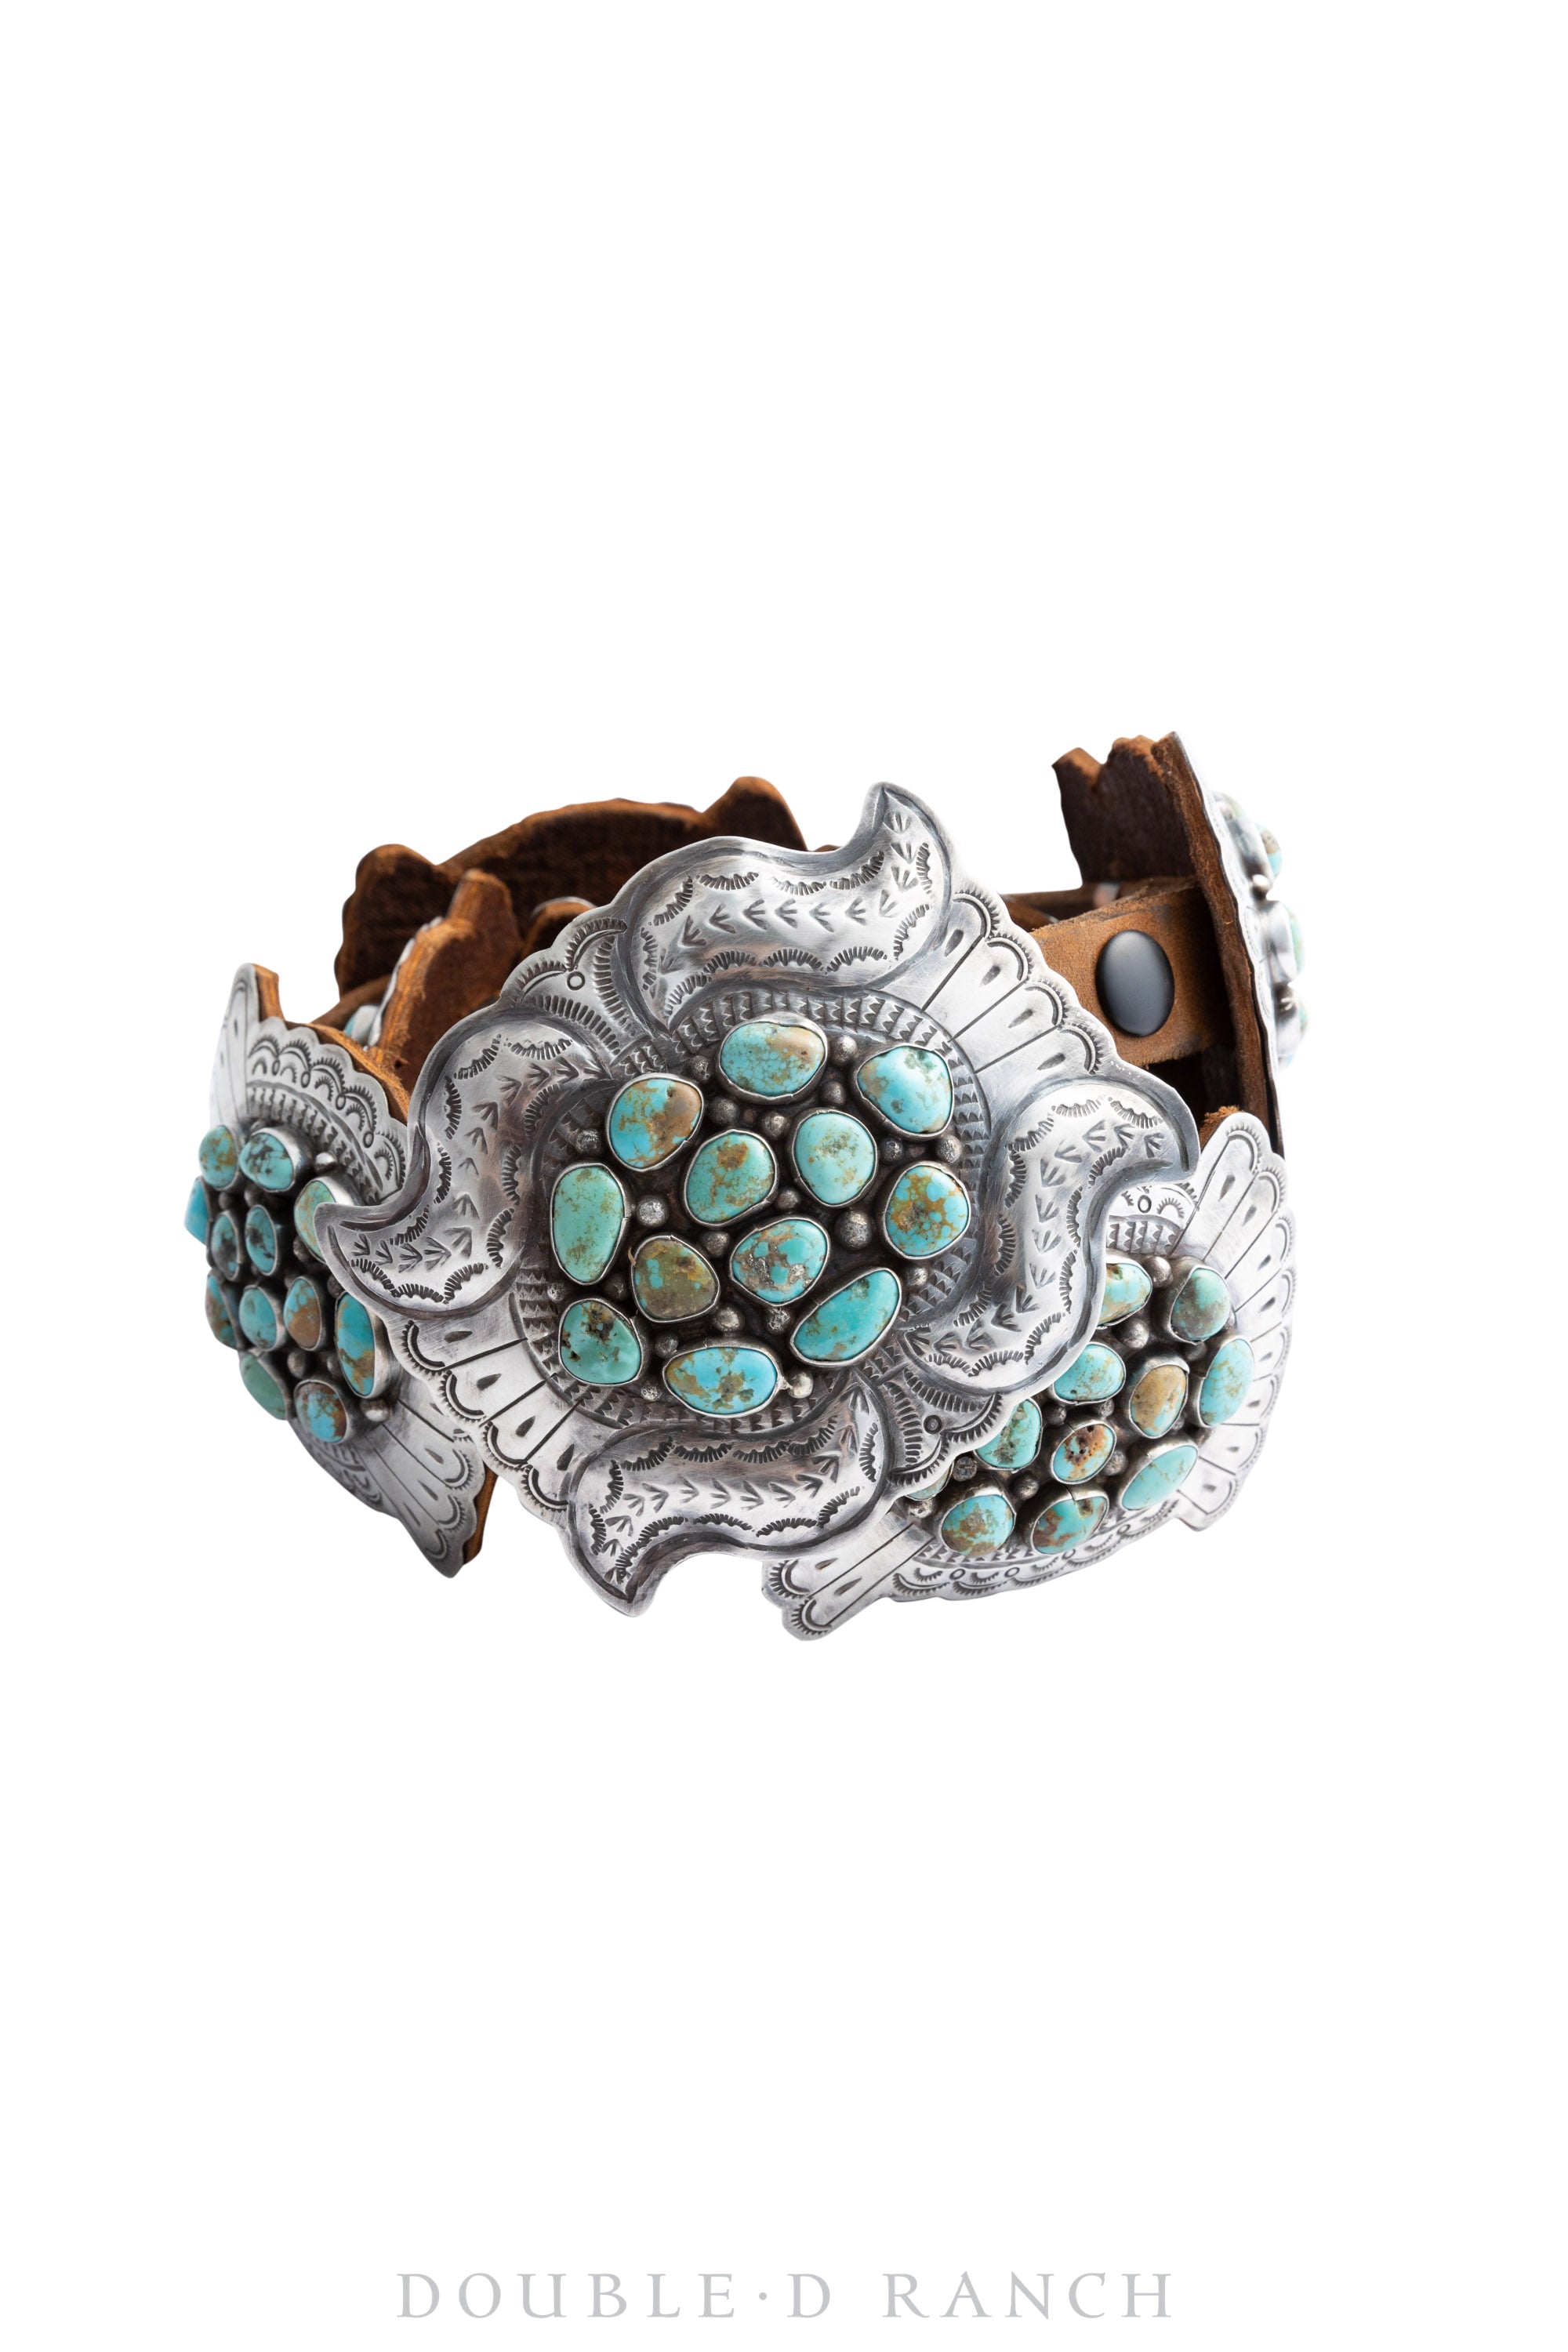 Belt, Concho, Turquoise, Third Phase Revival, Hallmark, Contemporary